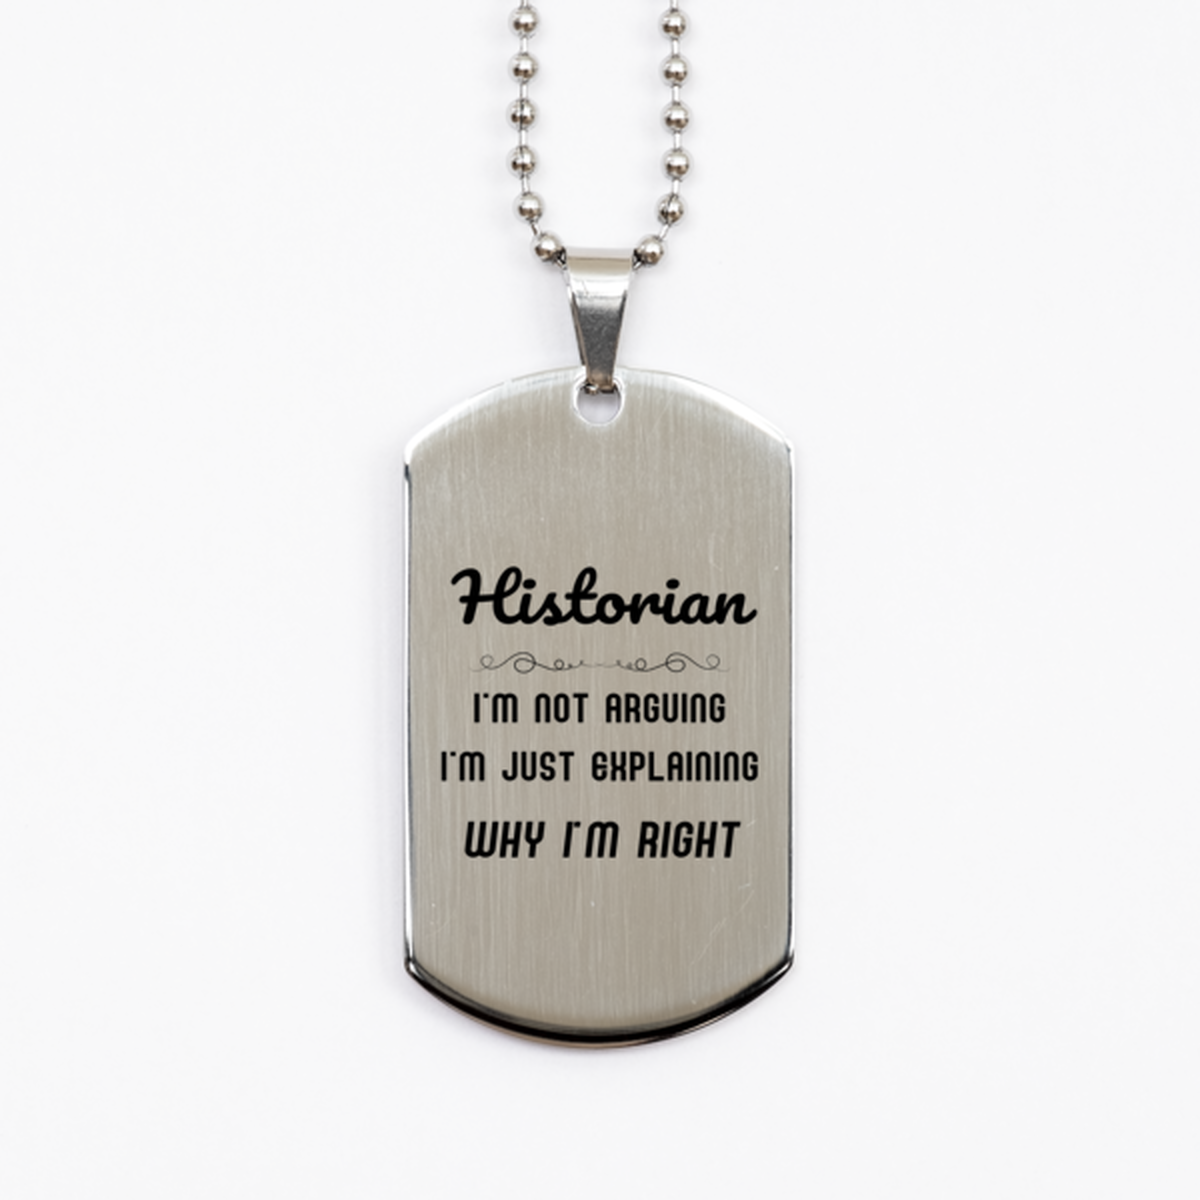 Historian I'm not Arguing. I'm Just Explaining Why I'm RIGHT Silver Dog Tag, Funny Saying Quote Historian Gifts For Historian Graduation Birthday Christmas Gifts for Men Women Coworker